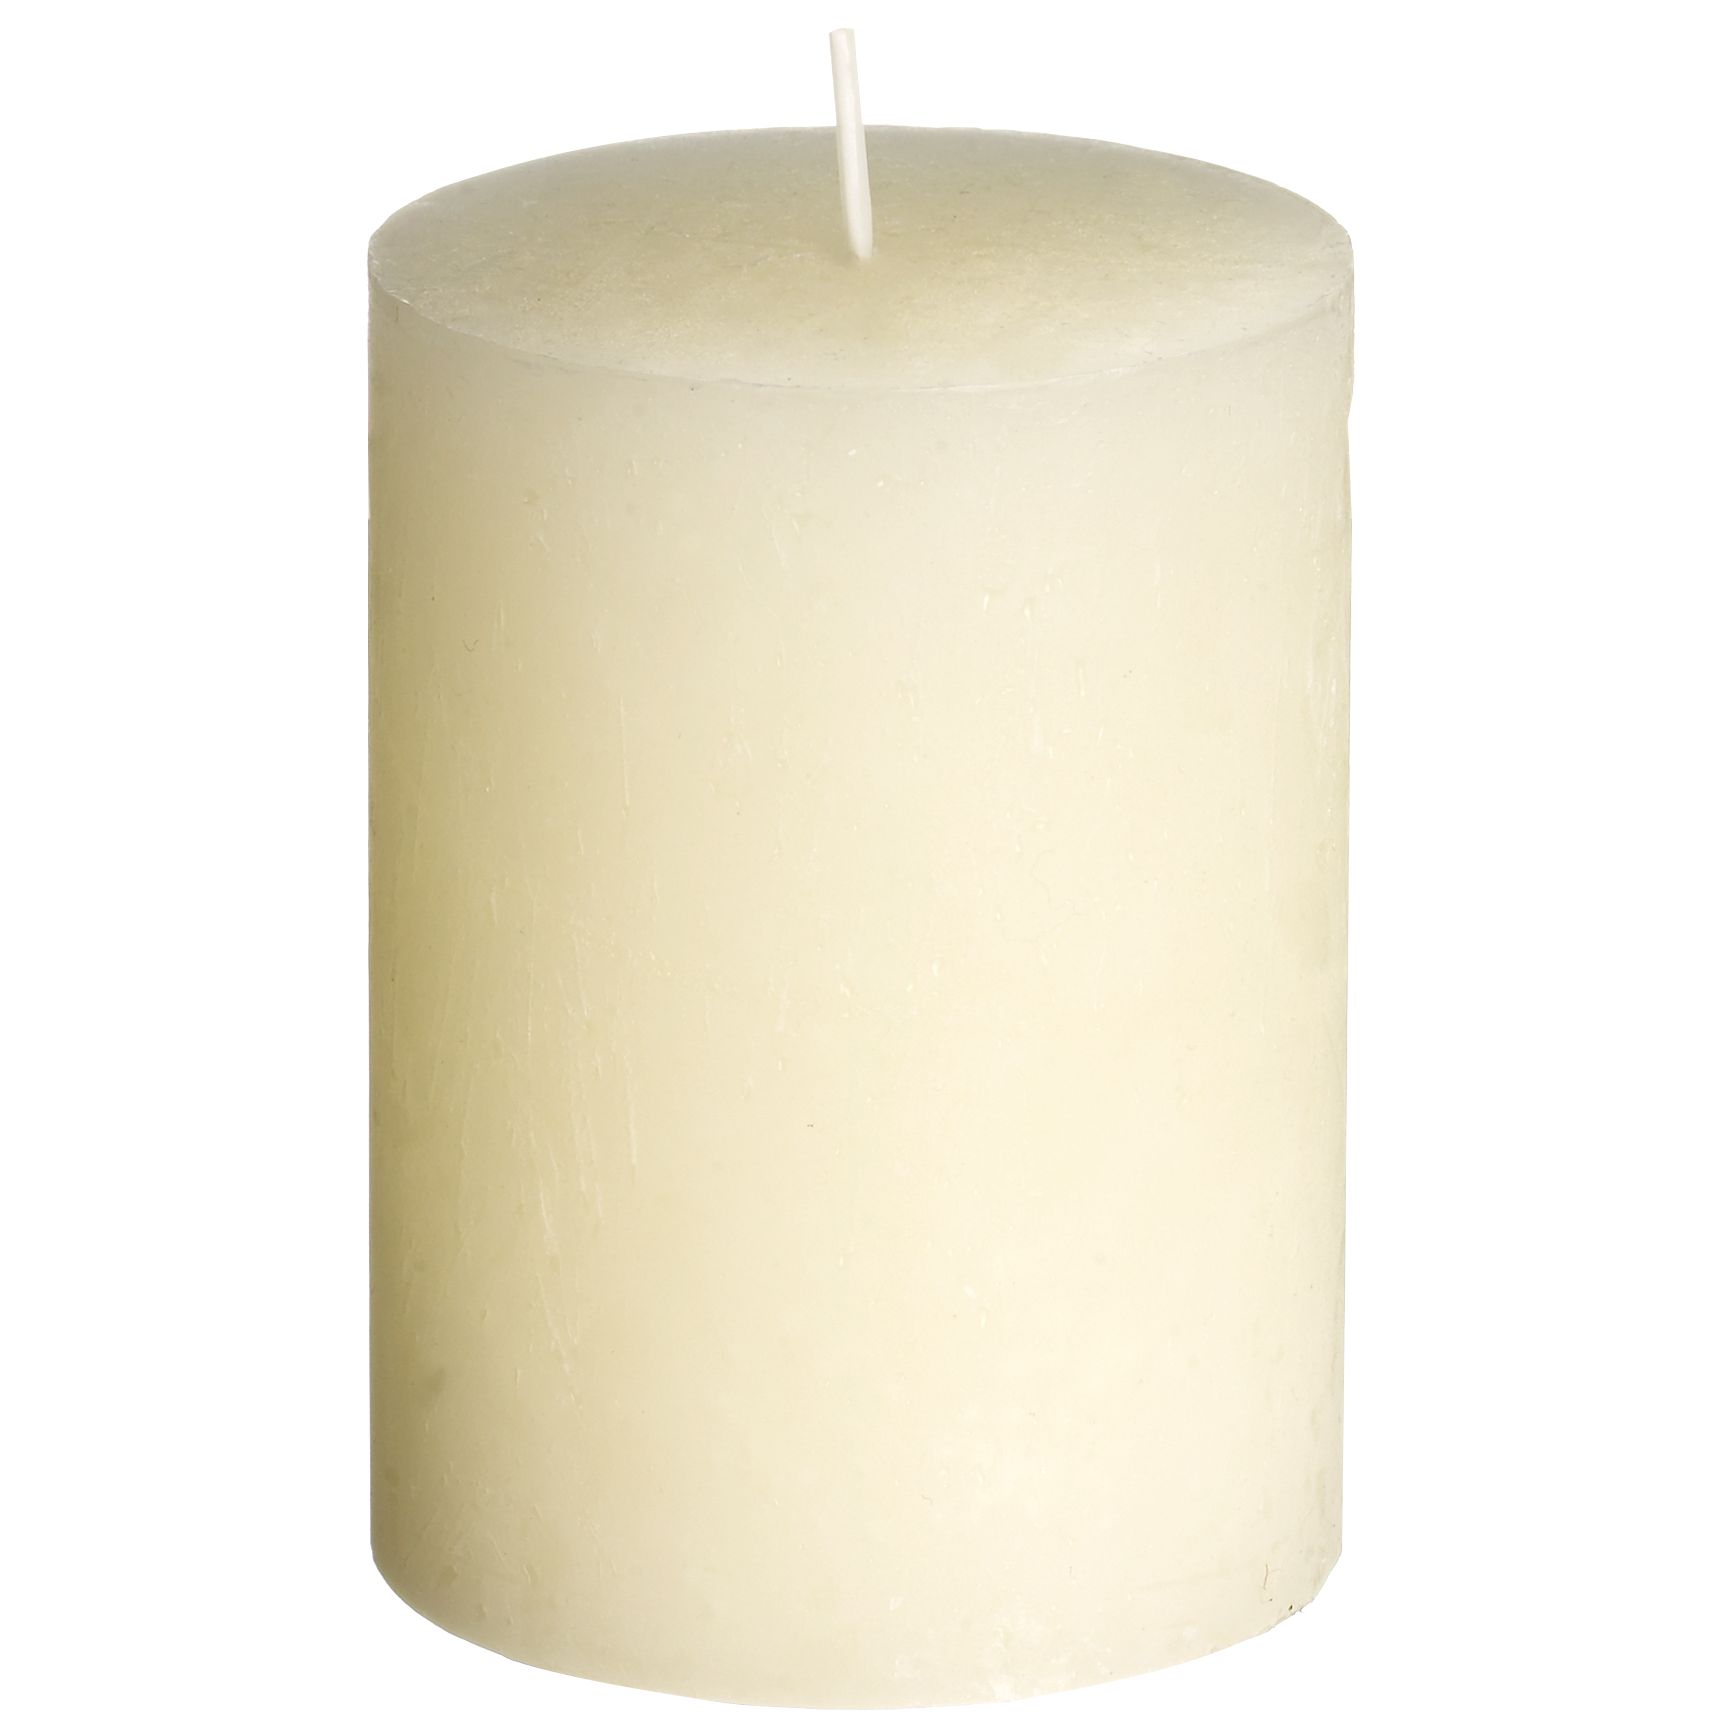 John Lewis Rustic Cone Candle, Small, H10cm